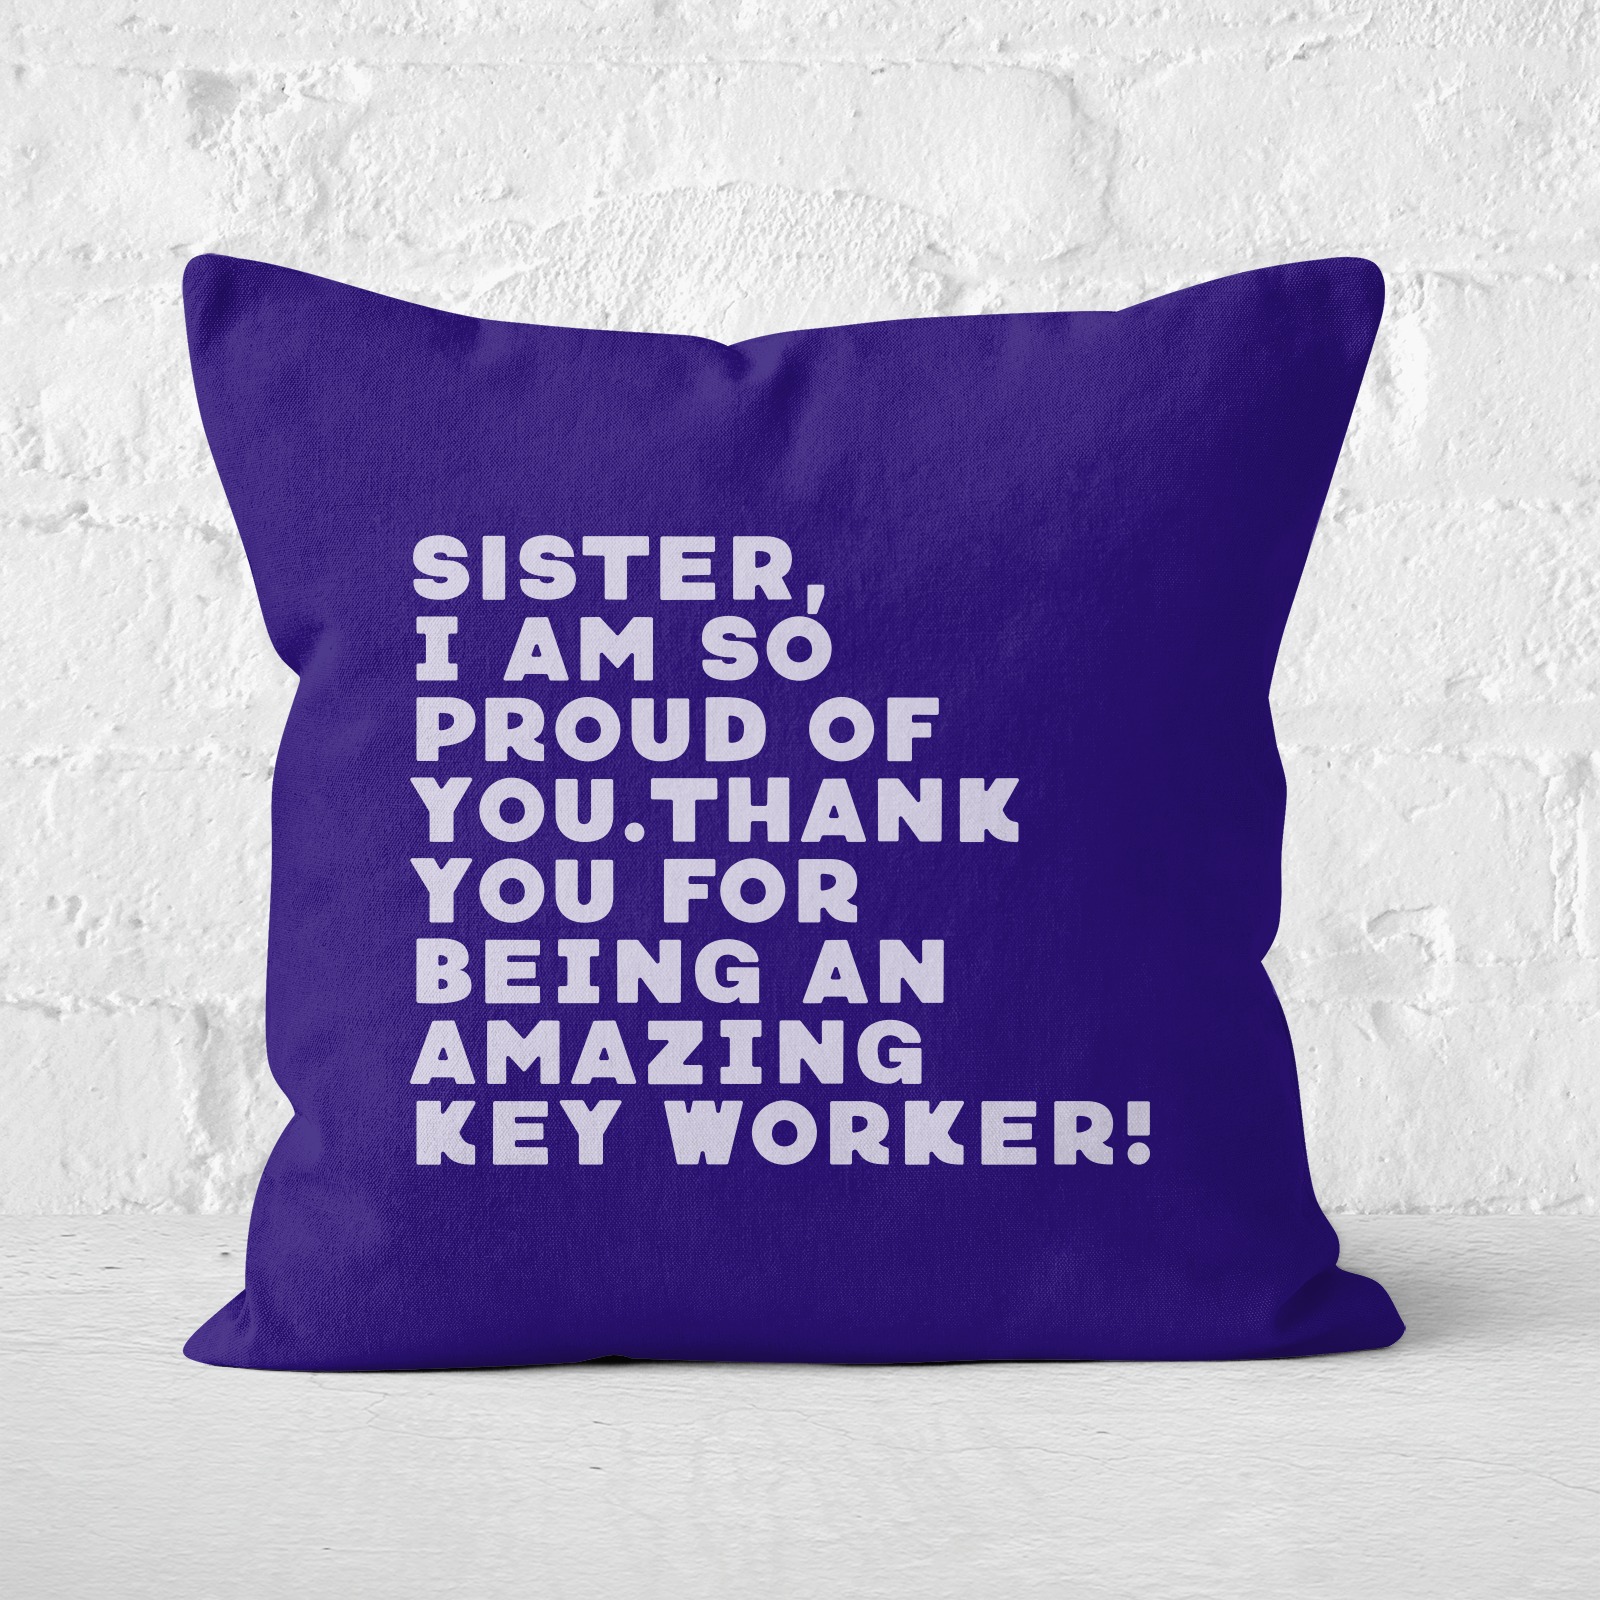 Sister, I Am So Proud Of You. Square Cushion - 60x60cm - Soft Touch